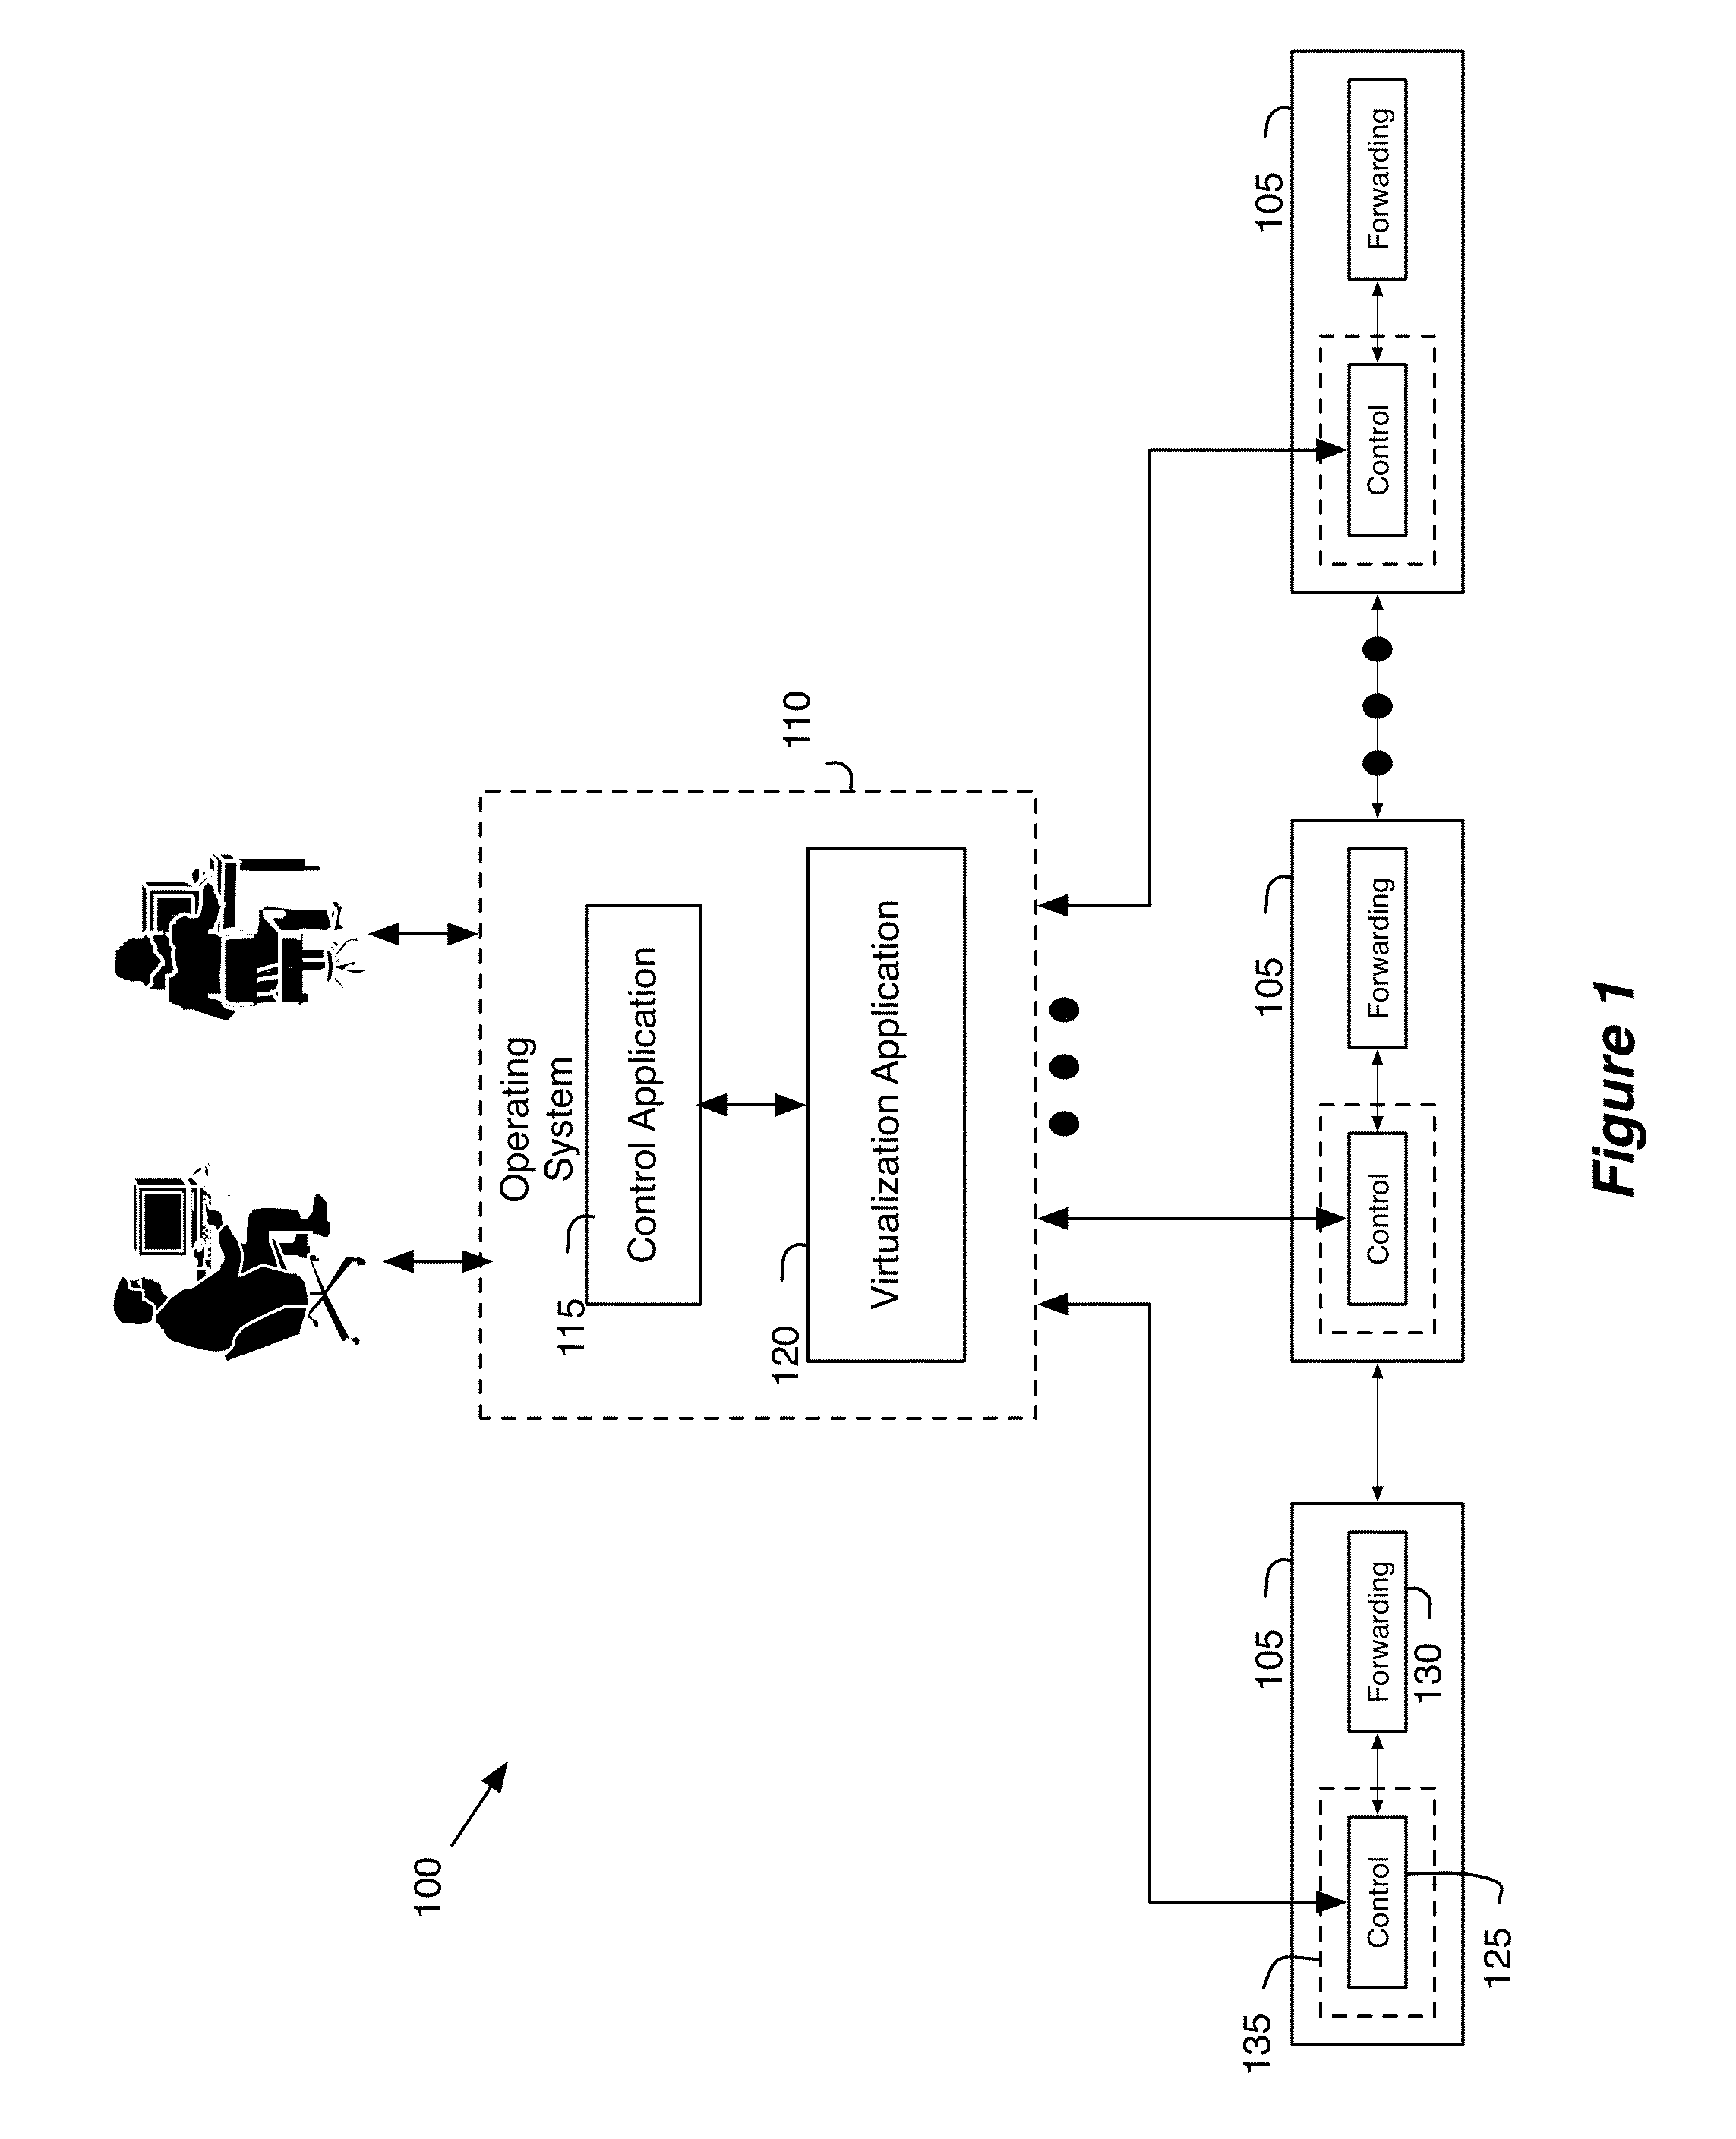 Pull-based state dissemination between managed forwarding elements